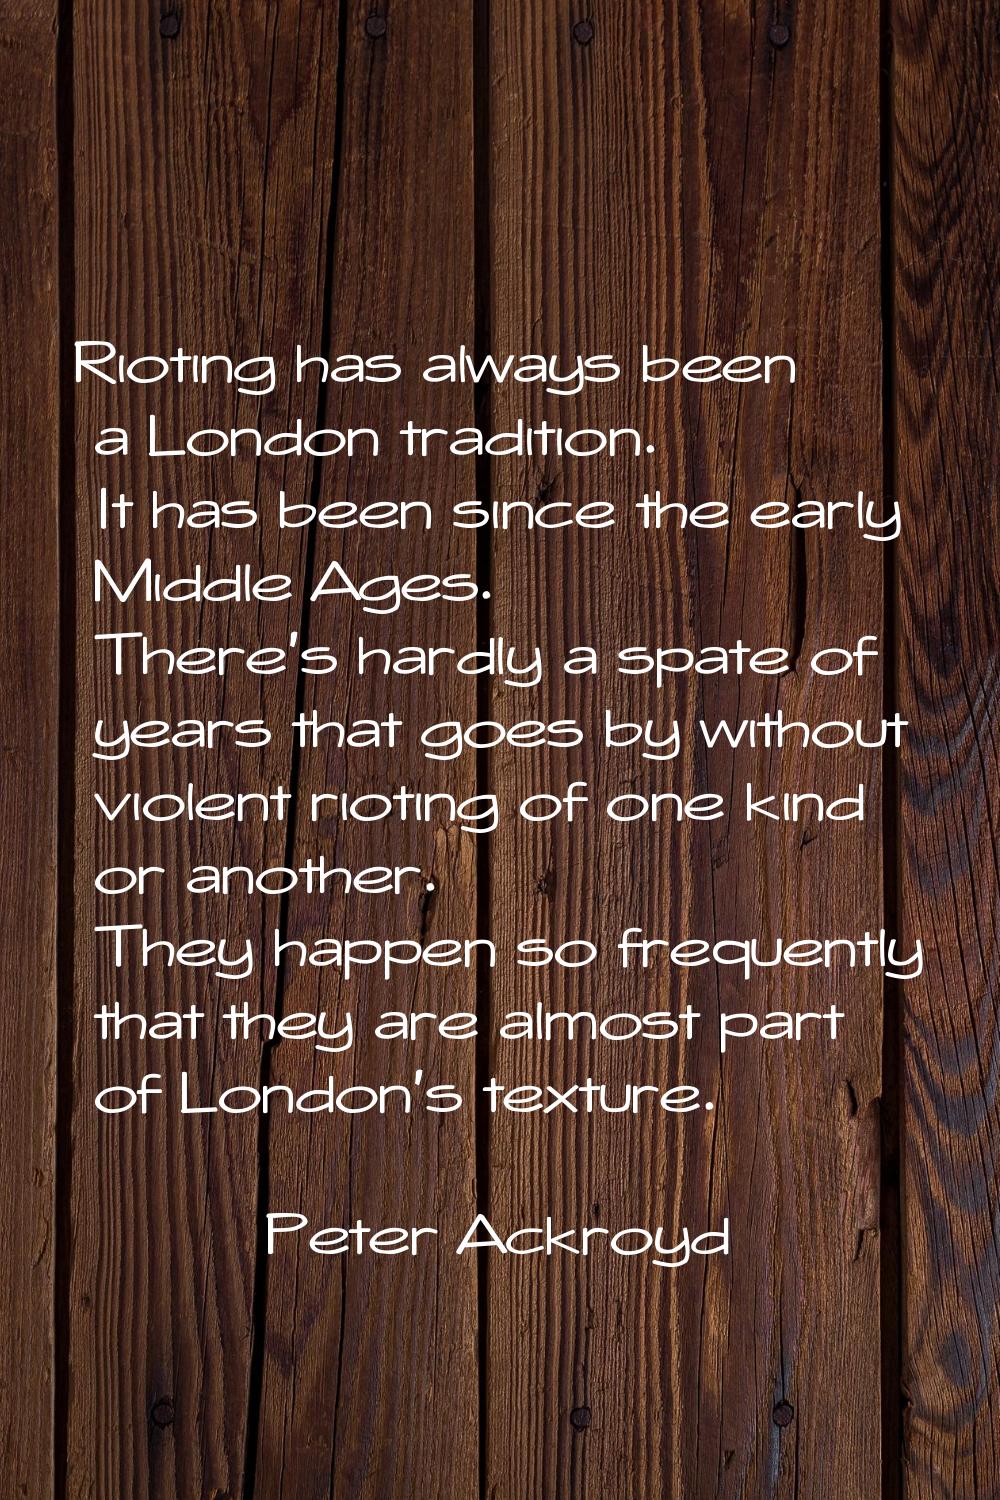 Rioting has always been a London tradition. It has been since the early Middle Ages. There's hardly